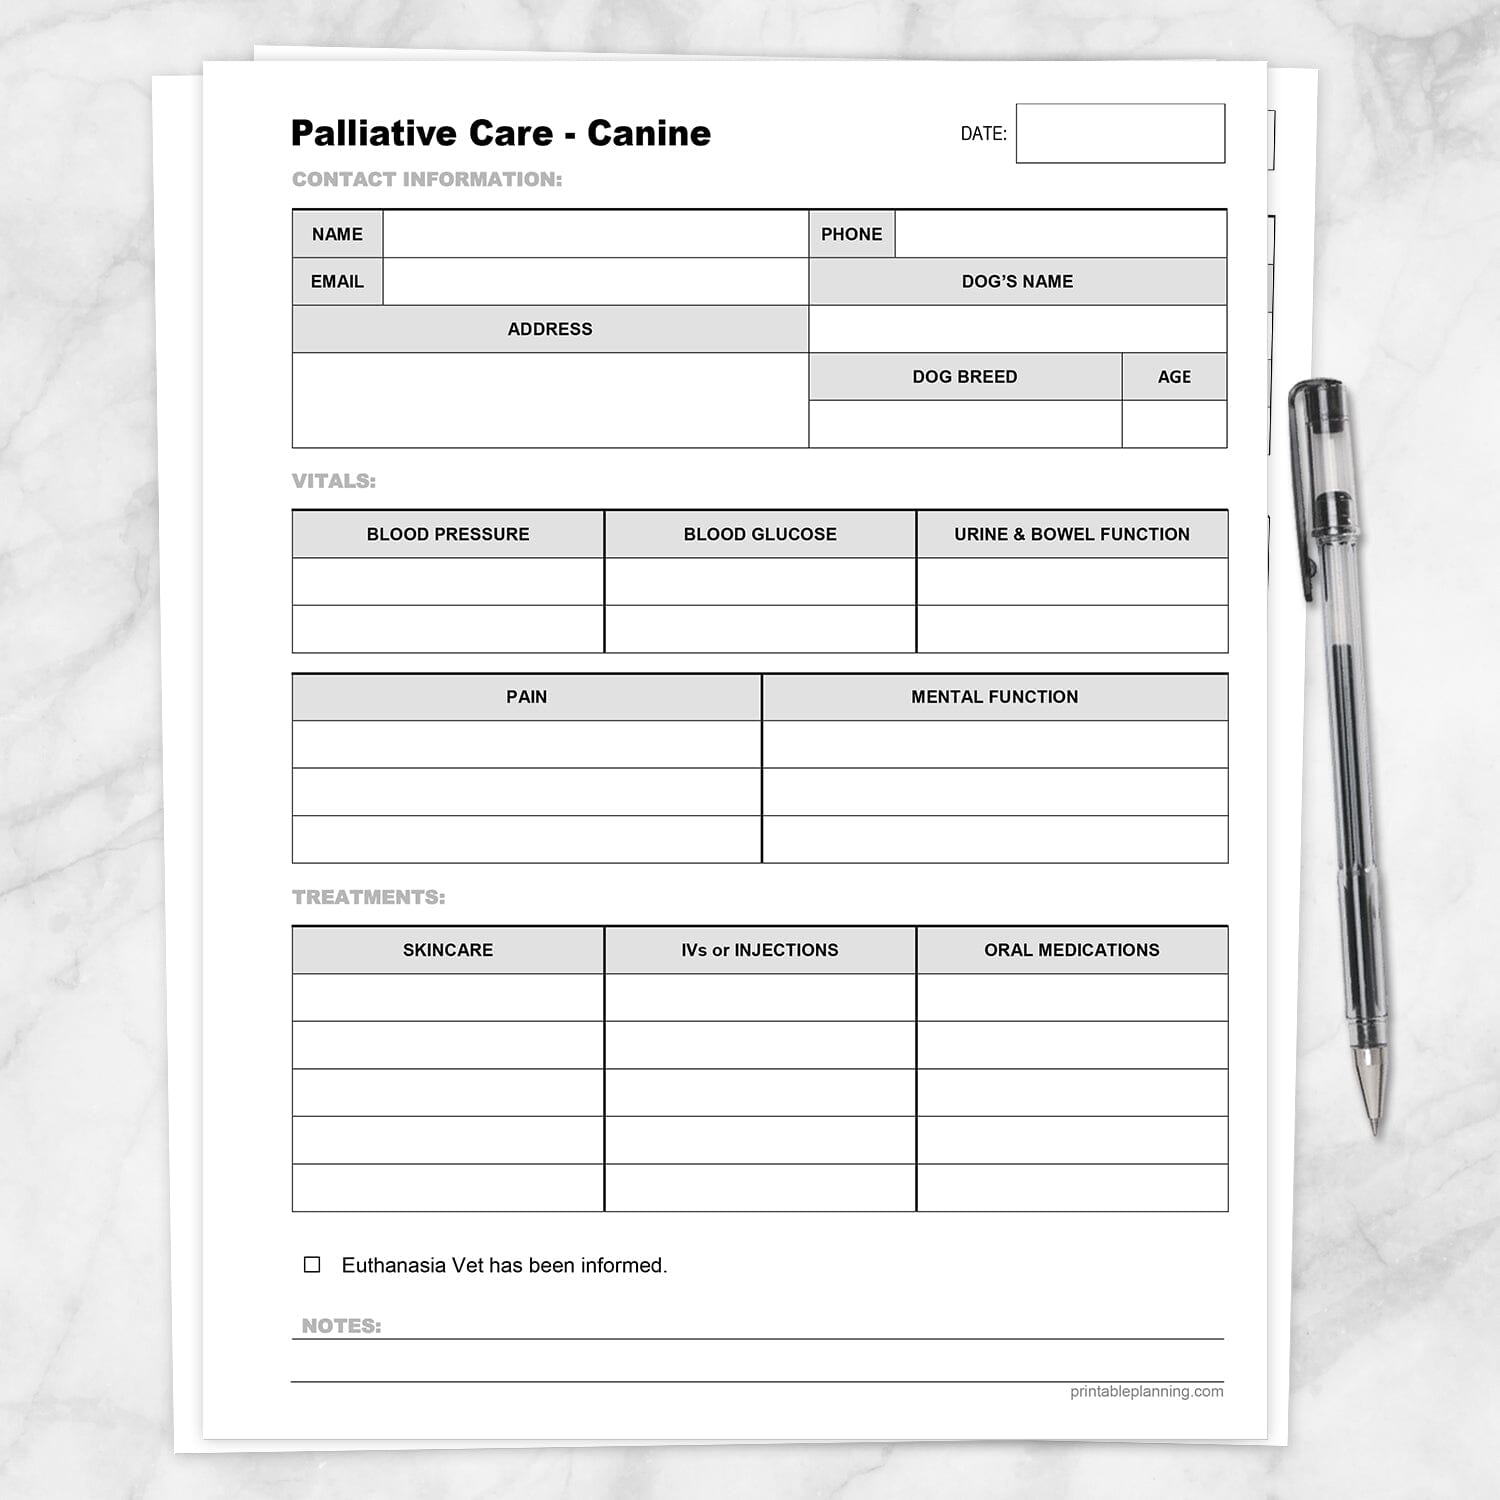 Printable Palliative Care Form for Canines at Printable Planning.